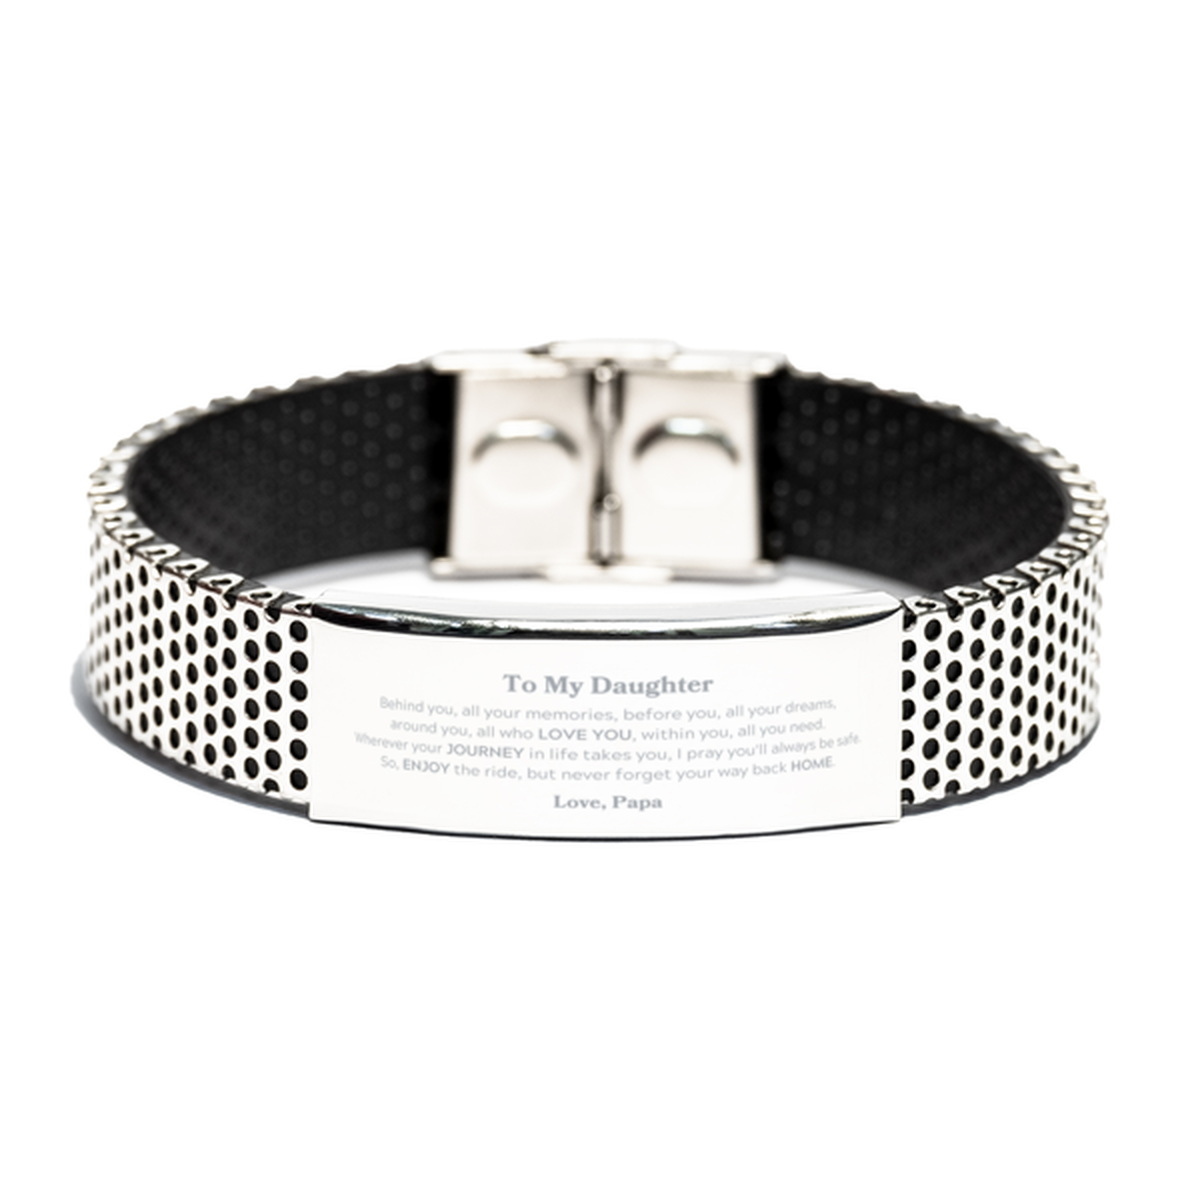 To My Daughter Graduation Gifts from Papa, Daughter Stainless Steel Bracelet Christmas Birthday Gifts for Daughter Behind you, all your memories, before you, all your dreams. Love, Papa